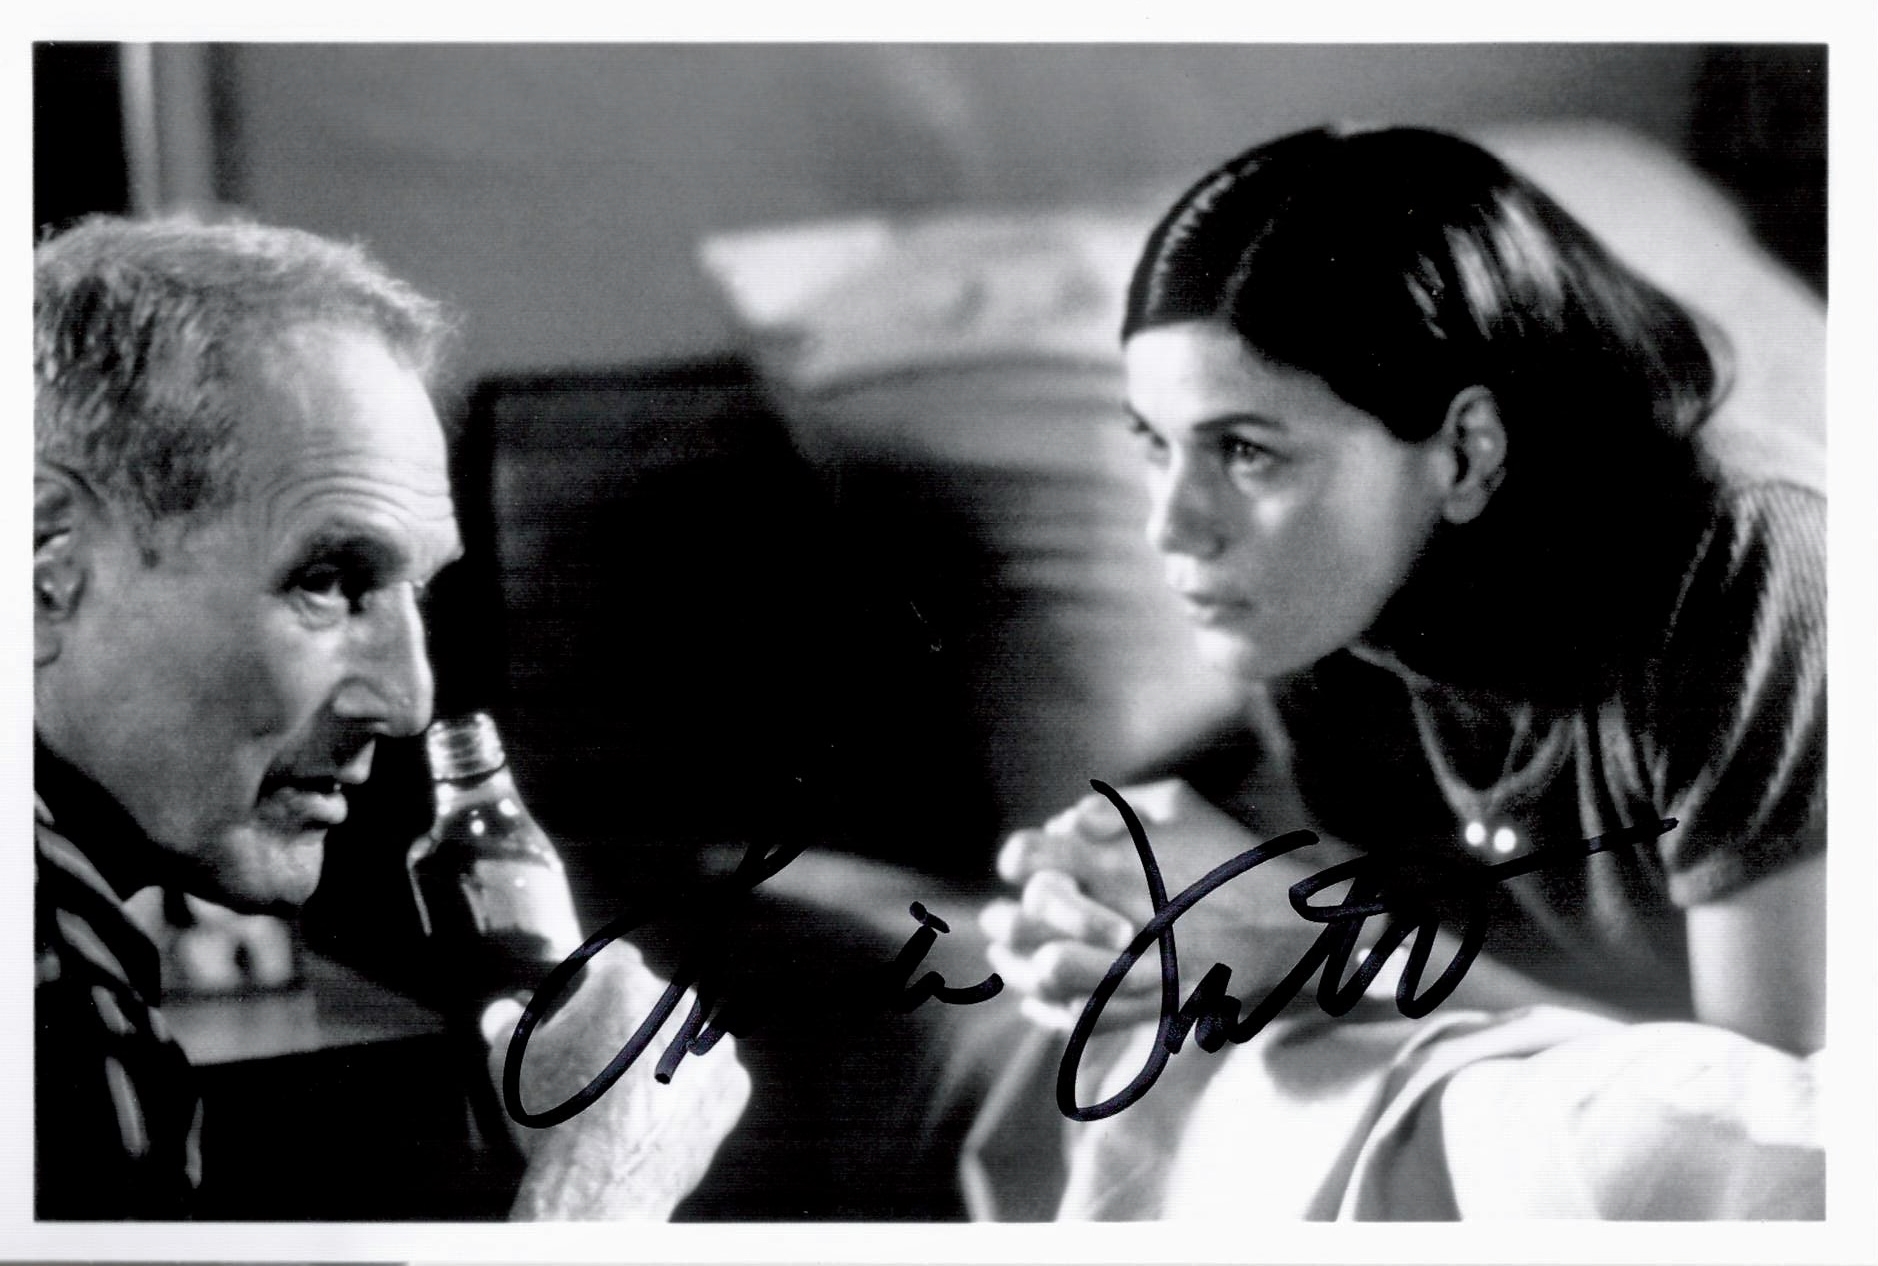 Linda Fiorentino signed 6 x 4 black and white photo. Fiorentino is an American former actress.